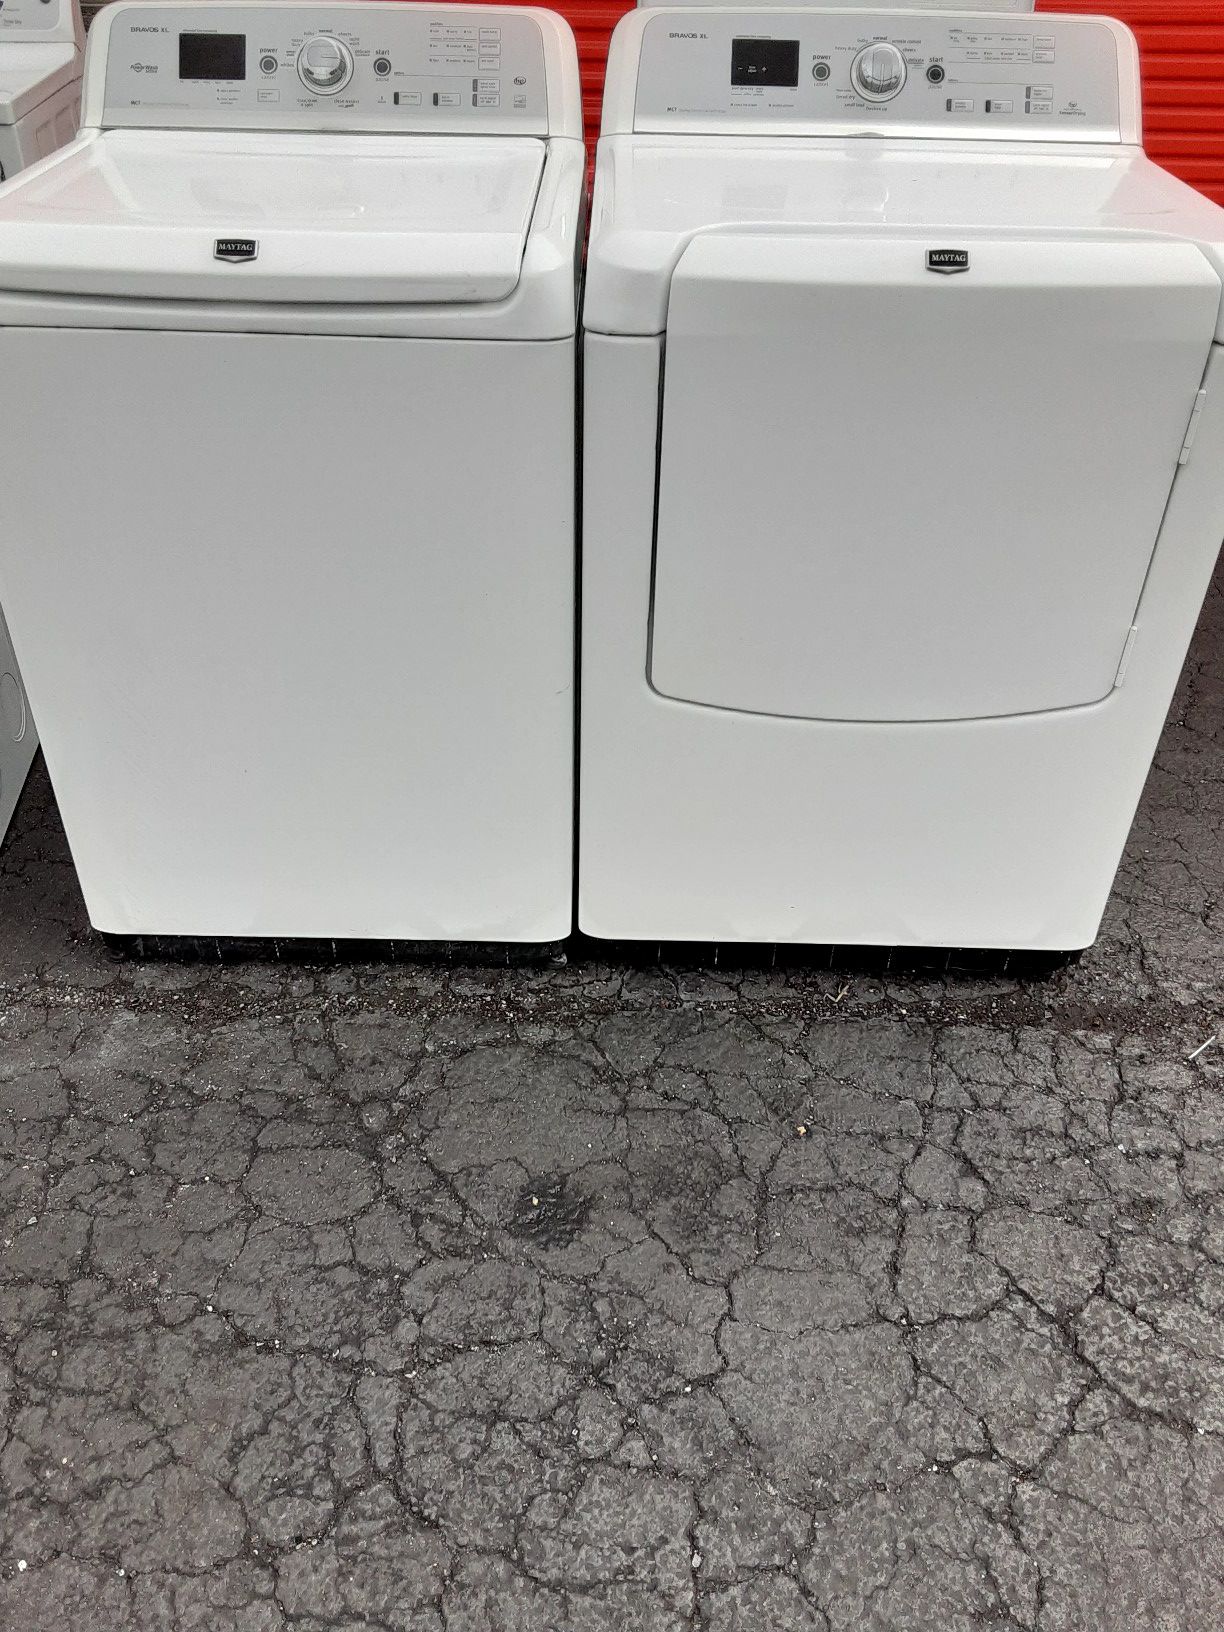 BEAUTIFUL MAYTAG SUPER CAPACITY WASHER DRYER SET WITH STAINLESS STEEL TUB AND NO AGITATOR